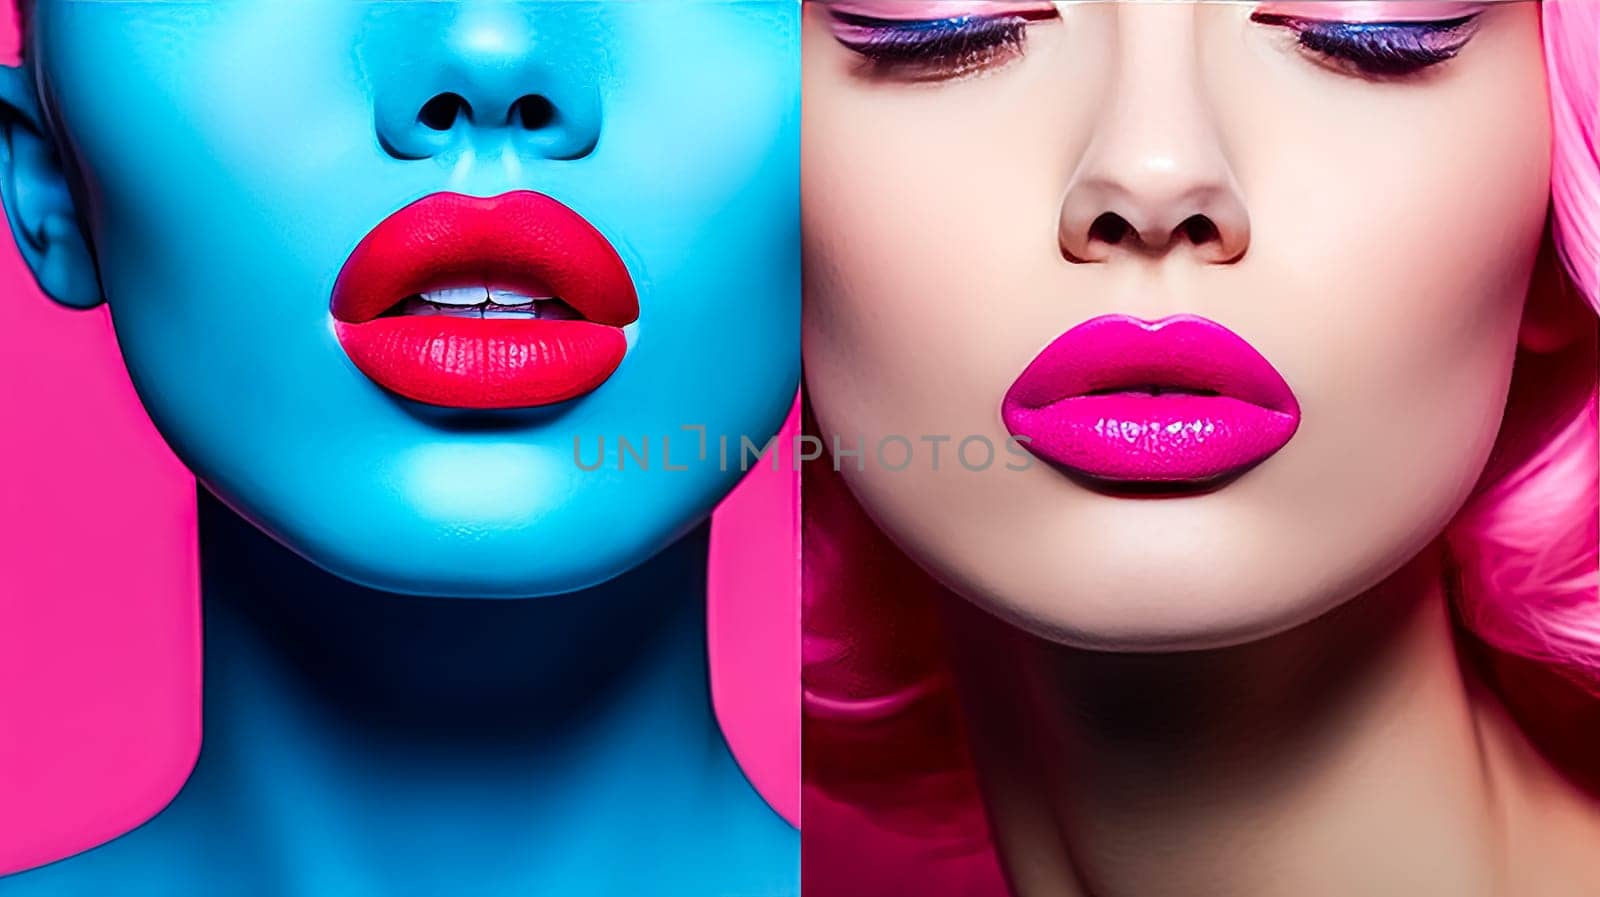 Two women with different colored lips. One is blue and the other is pink